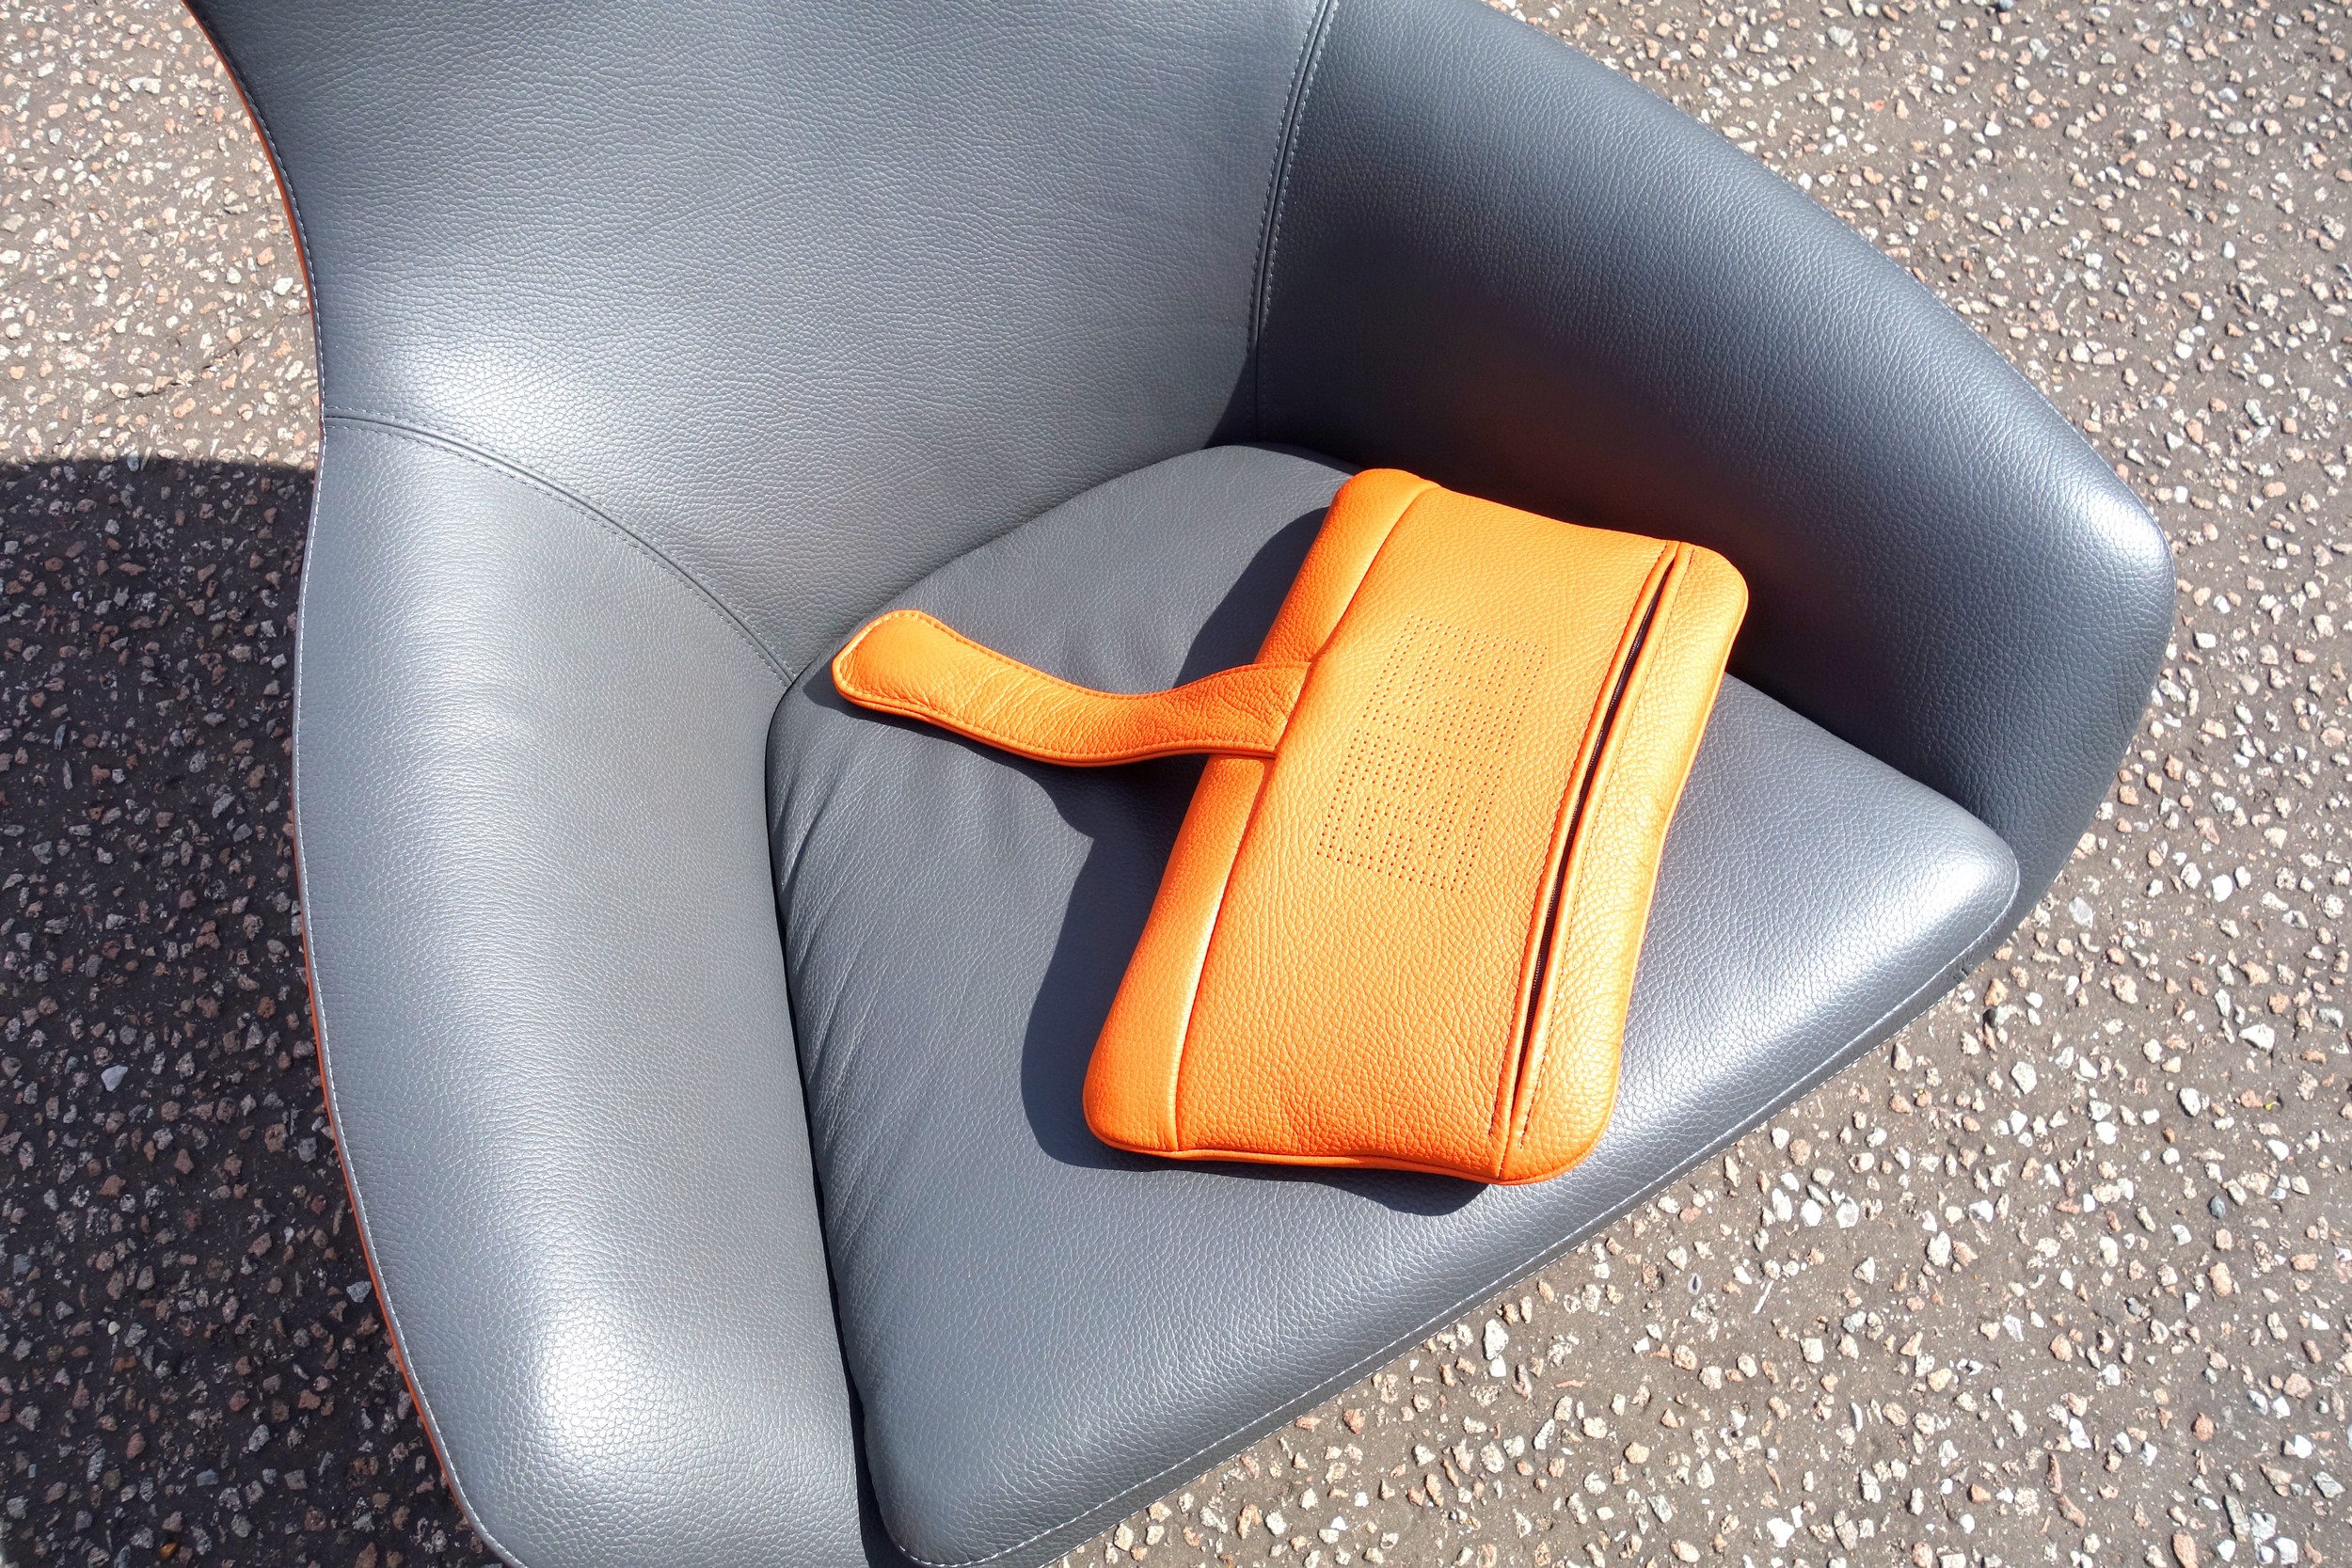 Leolux Caruzzo swivel armchair, designed by Hans Schrofer, launched 2015, custom made with orange - Image 5 of 6